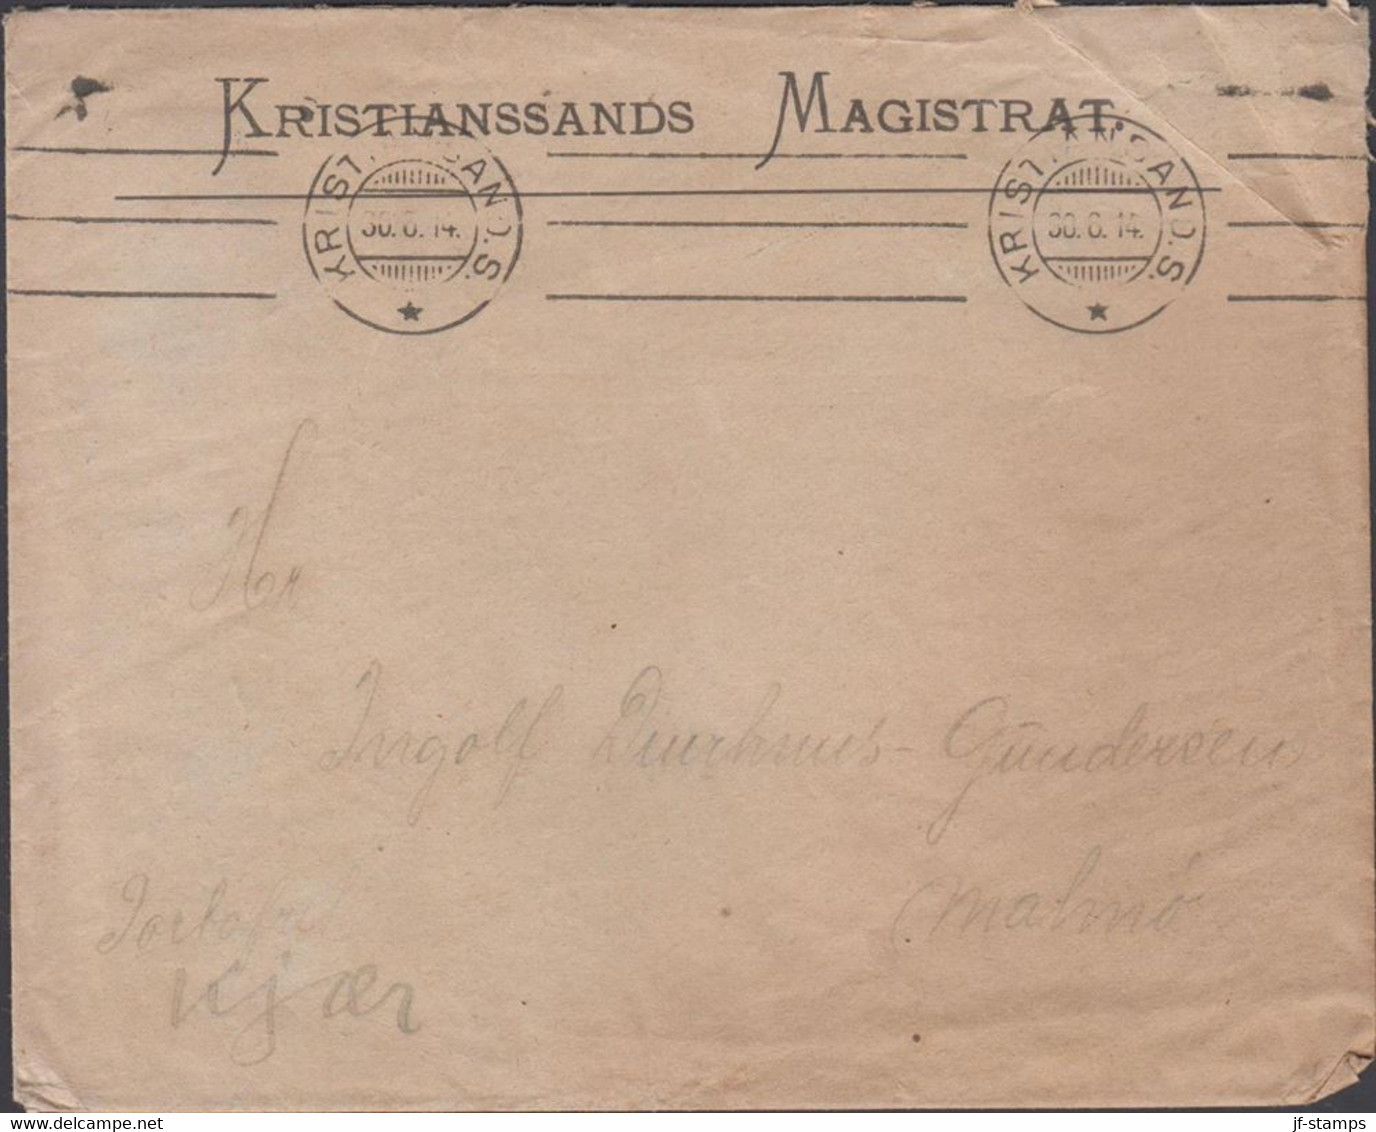 1914. NORGE. Portofri Cover To Malmö, Sverige From KRISTIANSSAND. S. 30.8.14. Letter Included.  - JF427644 - ...-1855 Vorphilatelie